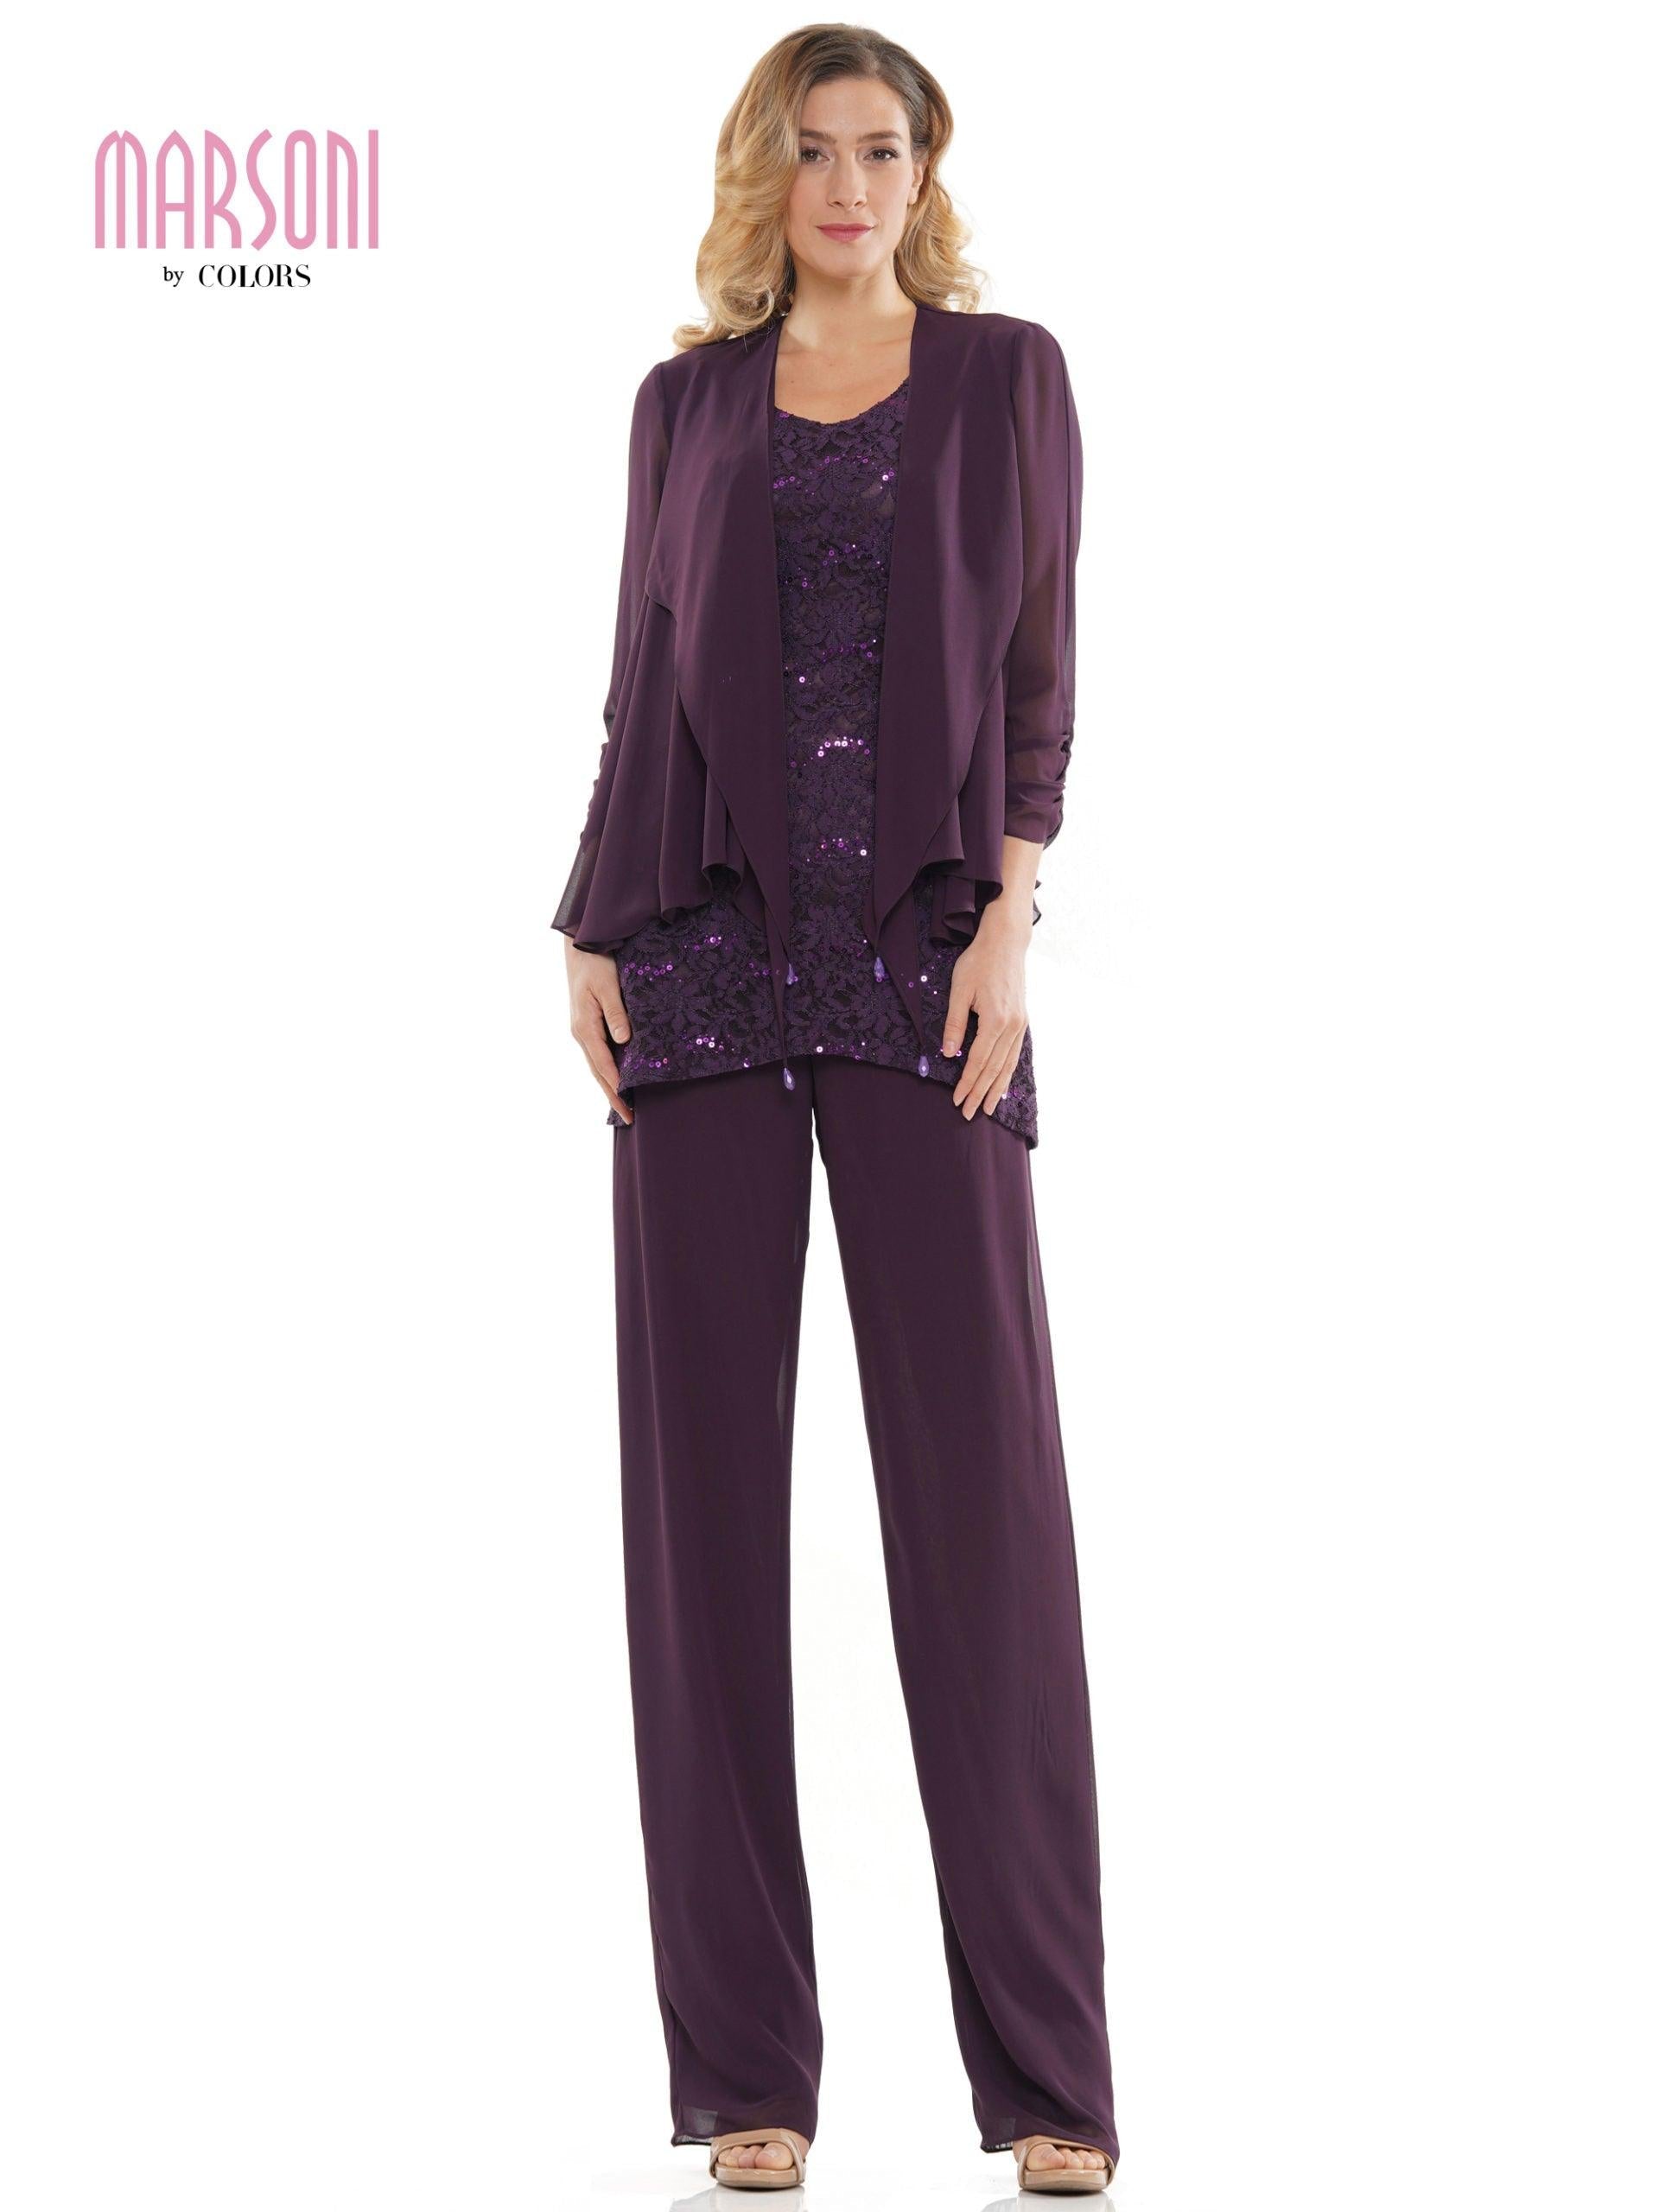 Marsoni Formal Mother of the Bride Pant Suit 303 - The Dress Outlet